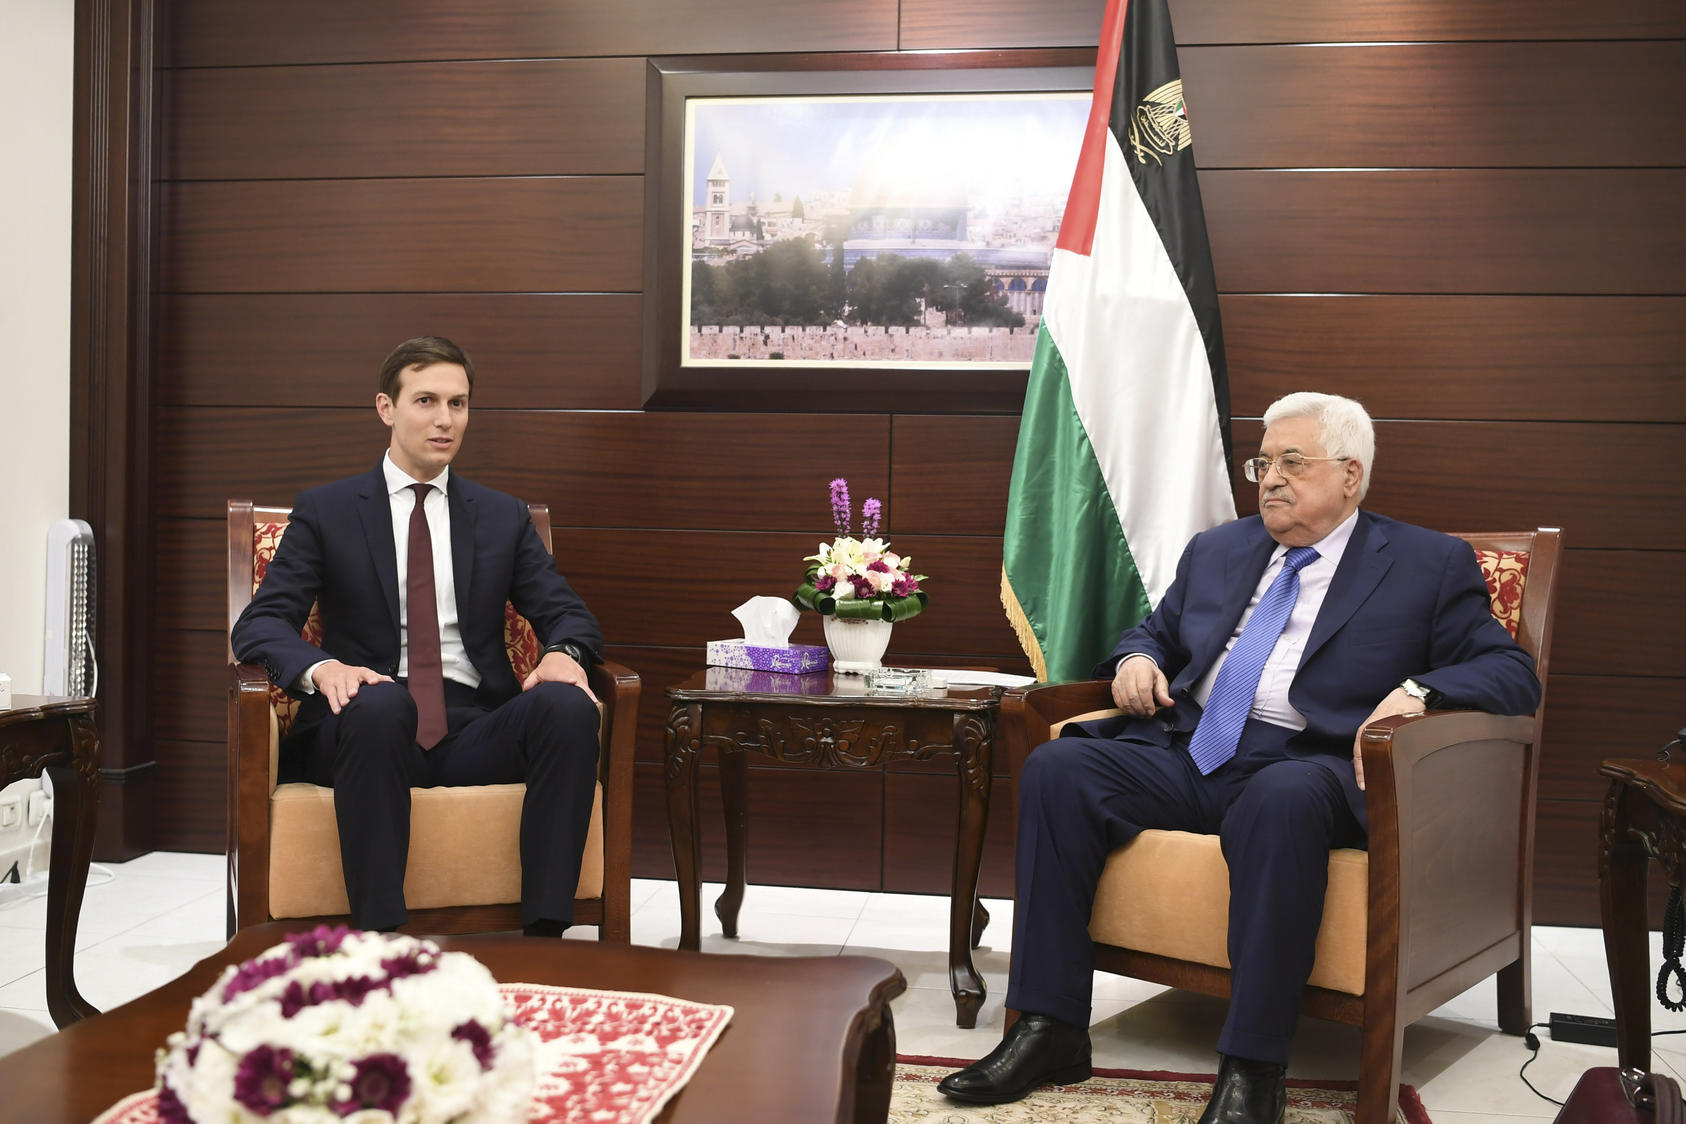 In a handout photo, Jared Kushner, left, President Donald Trump’s senior adviser, meets with President Mahmoud Abbas of the Palestinian Authority in Ramallah, West Bank, Aug. 24, 2017. 